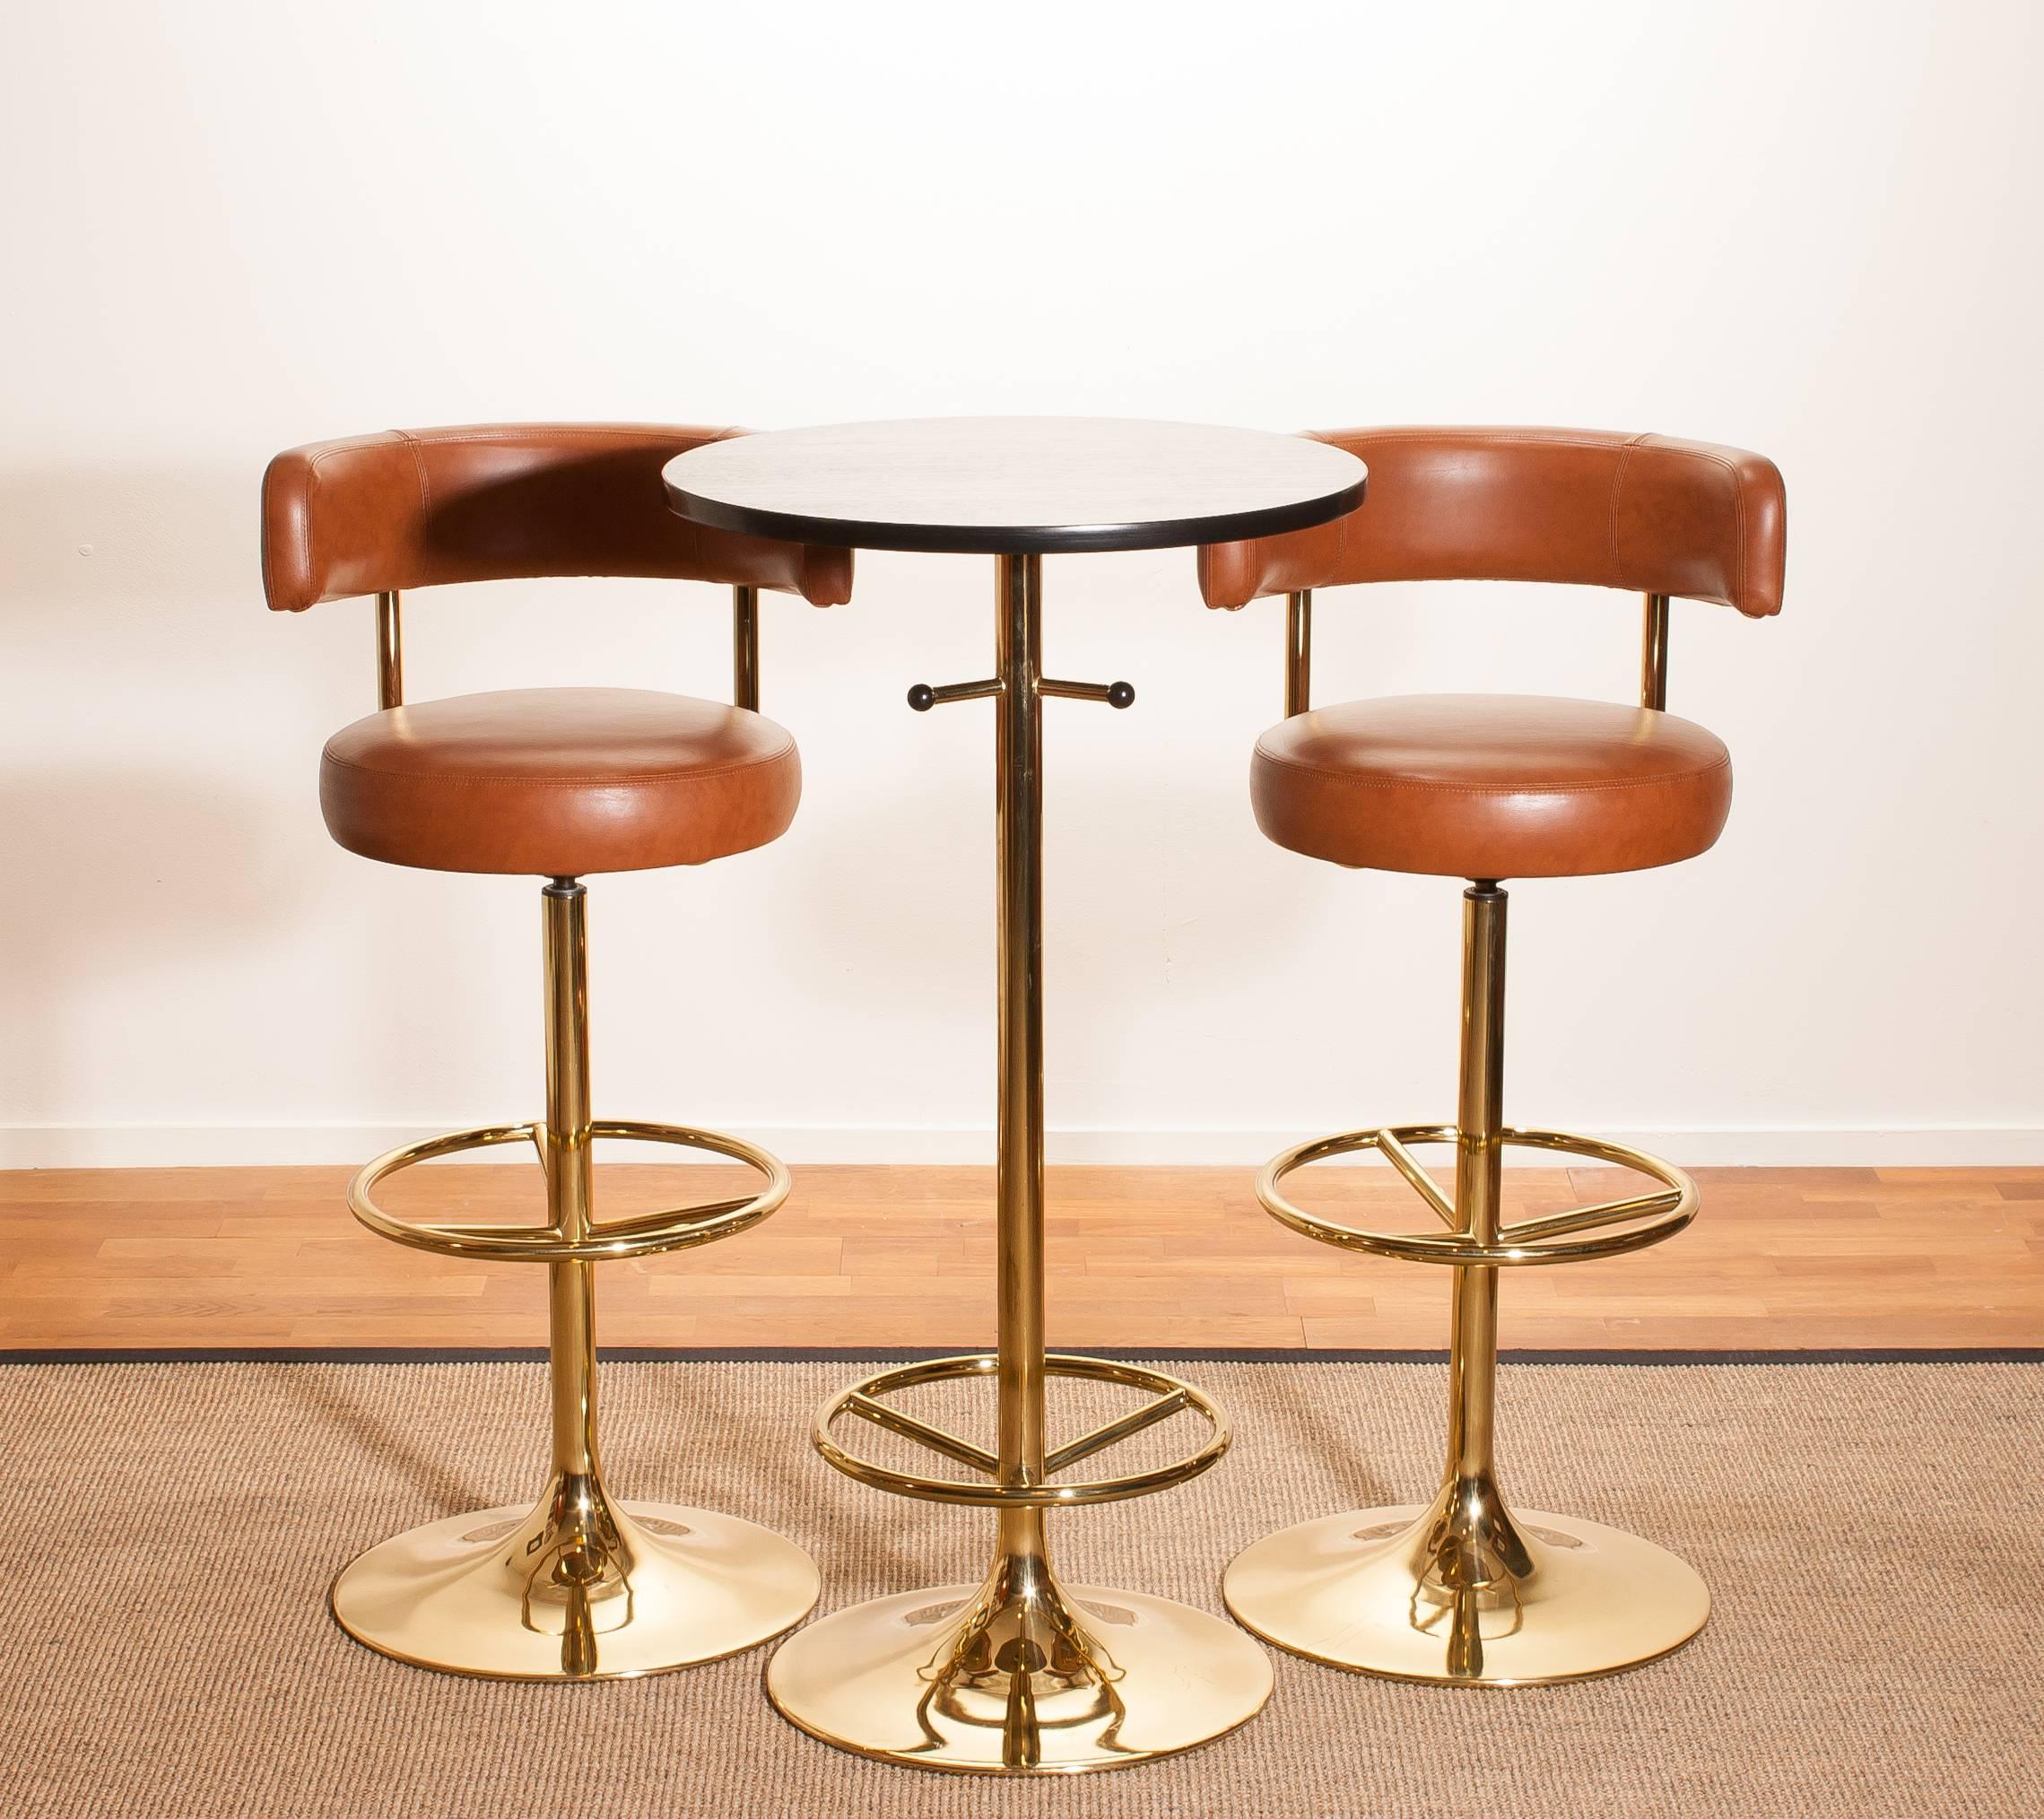 A magnificent set of beautiful bar stools and bar table designed by Börje Johanson for Johanson Design, Sweden.
The stools are very comfortable and look great with the combination of brass with new reupholstered cognac faux leather.
And also the